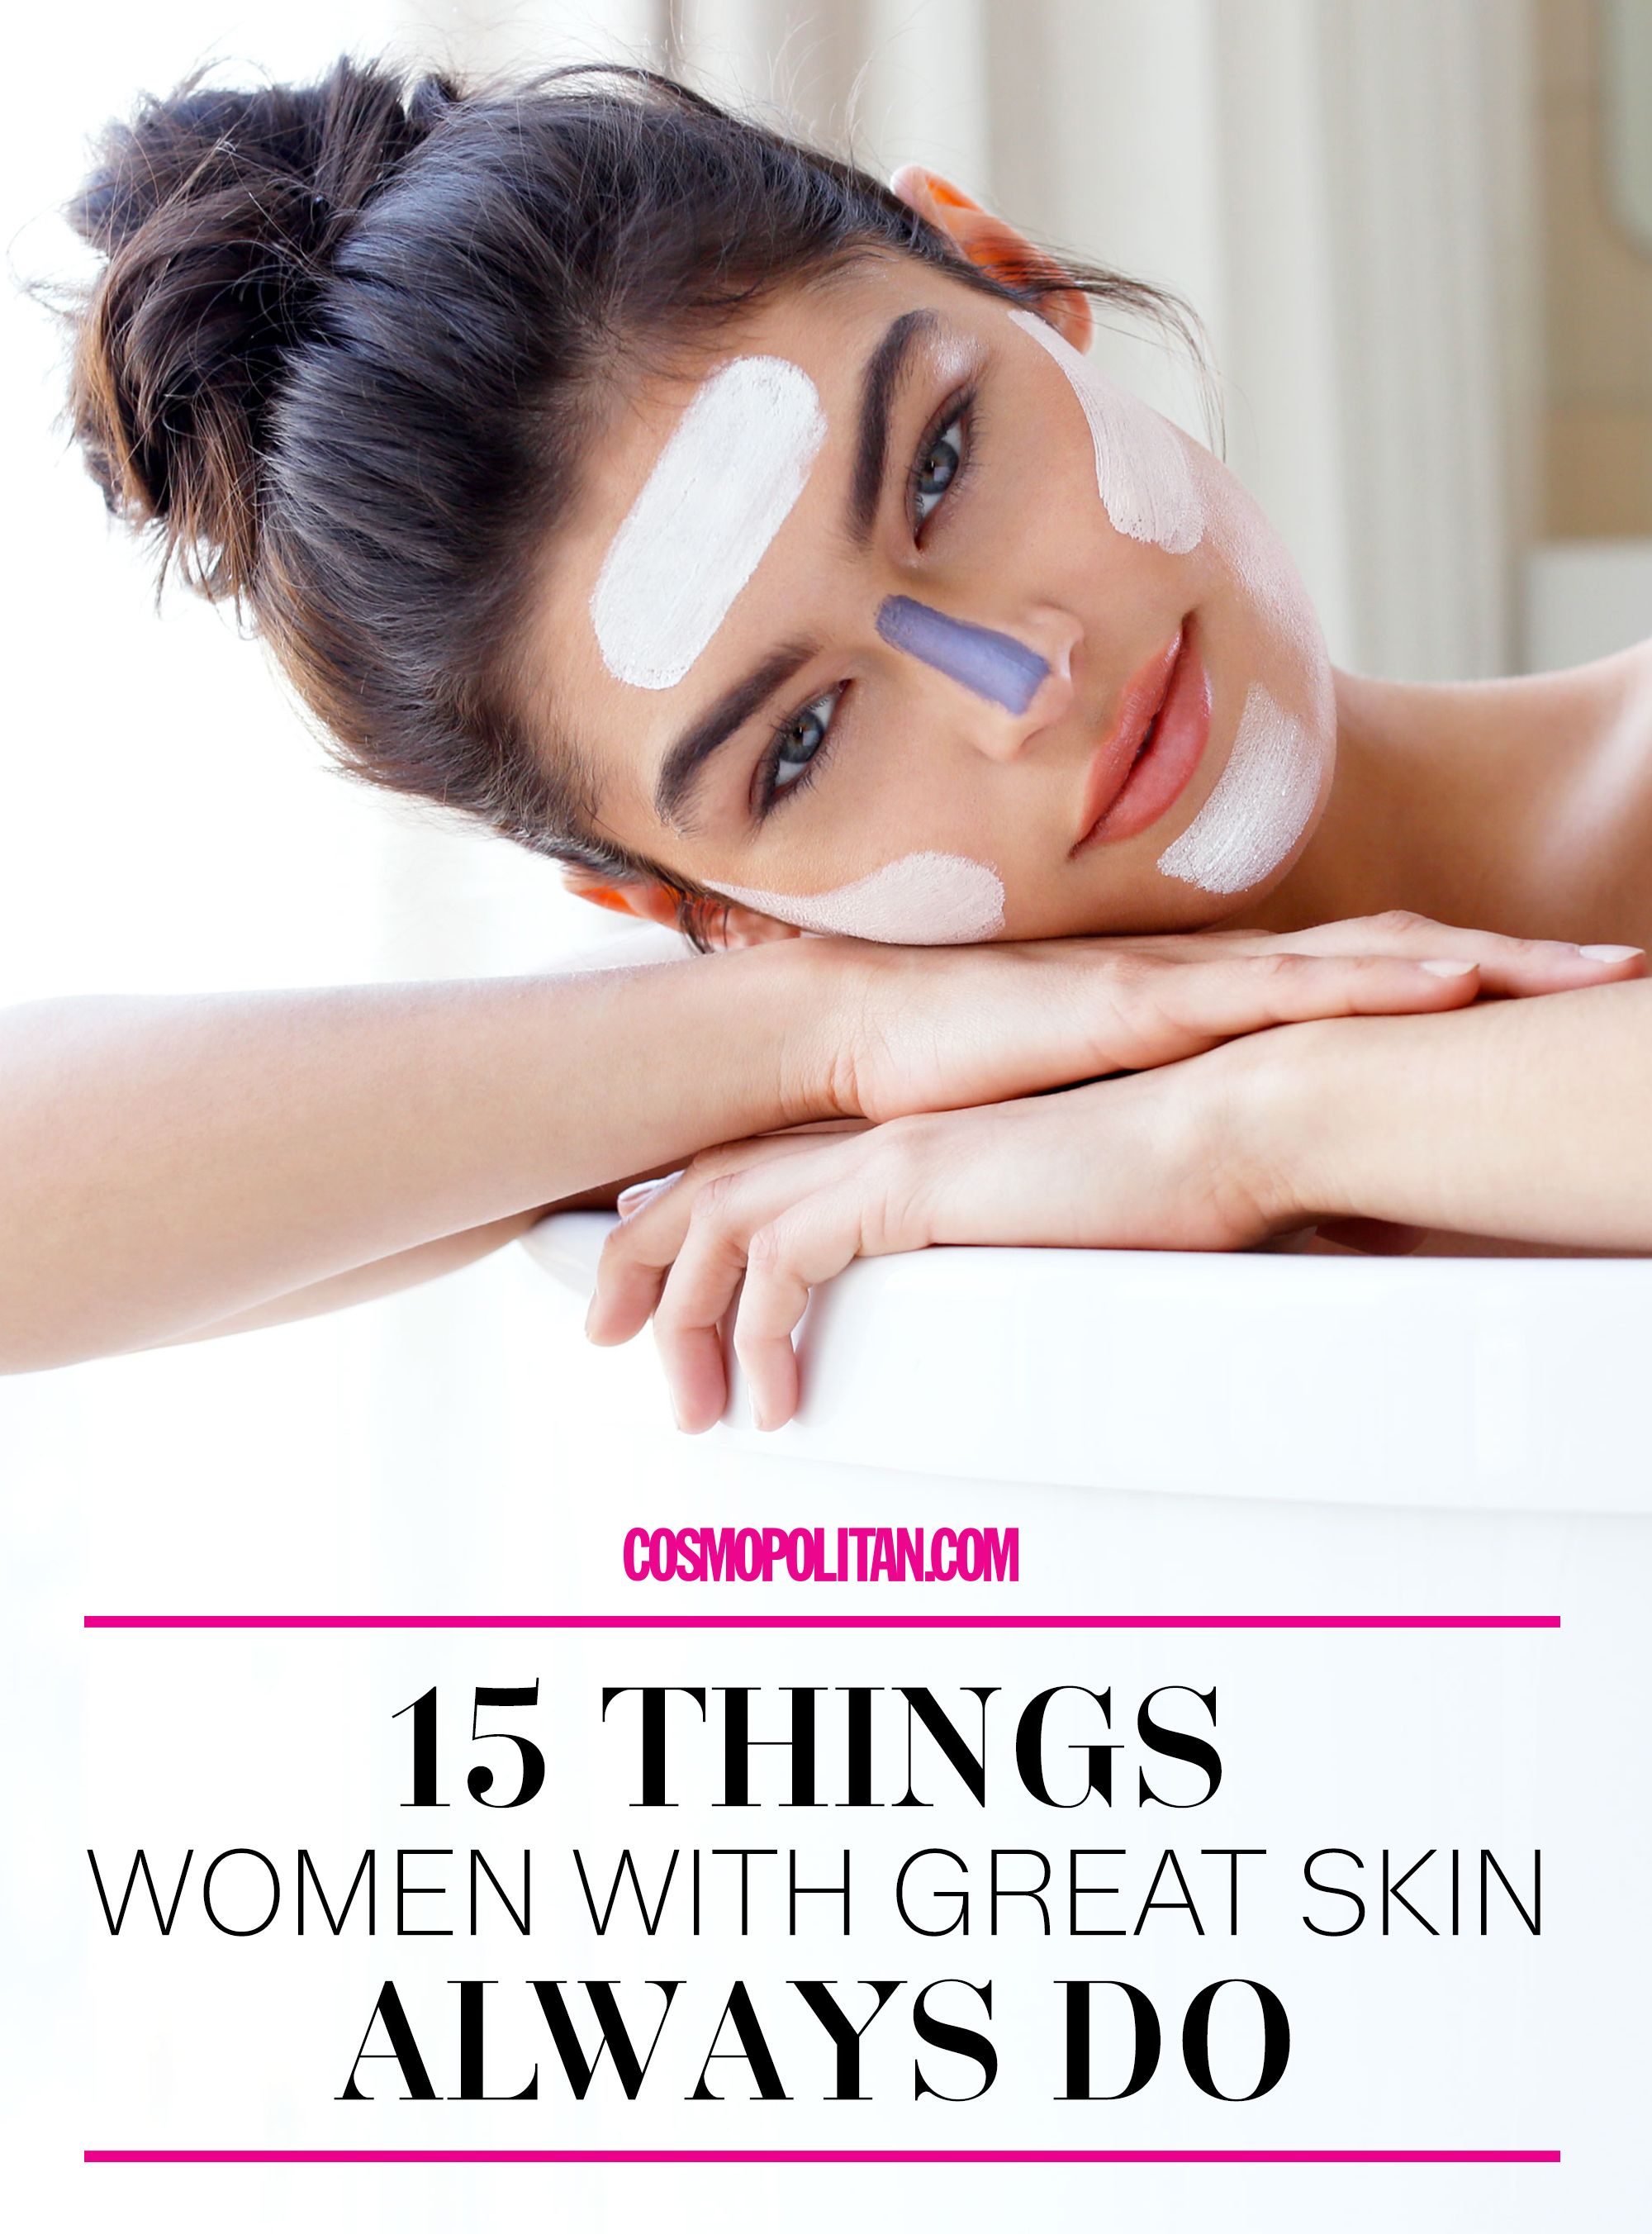 15 Things Women With Great Skin Always Do